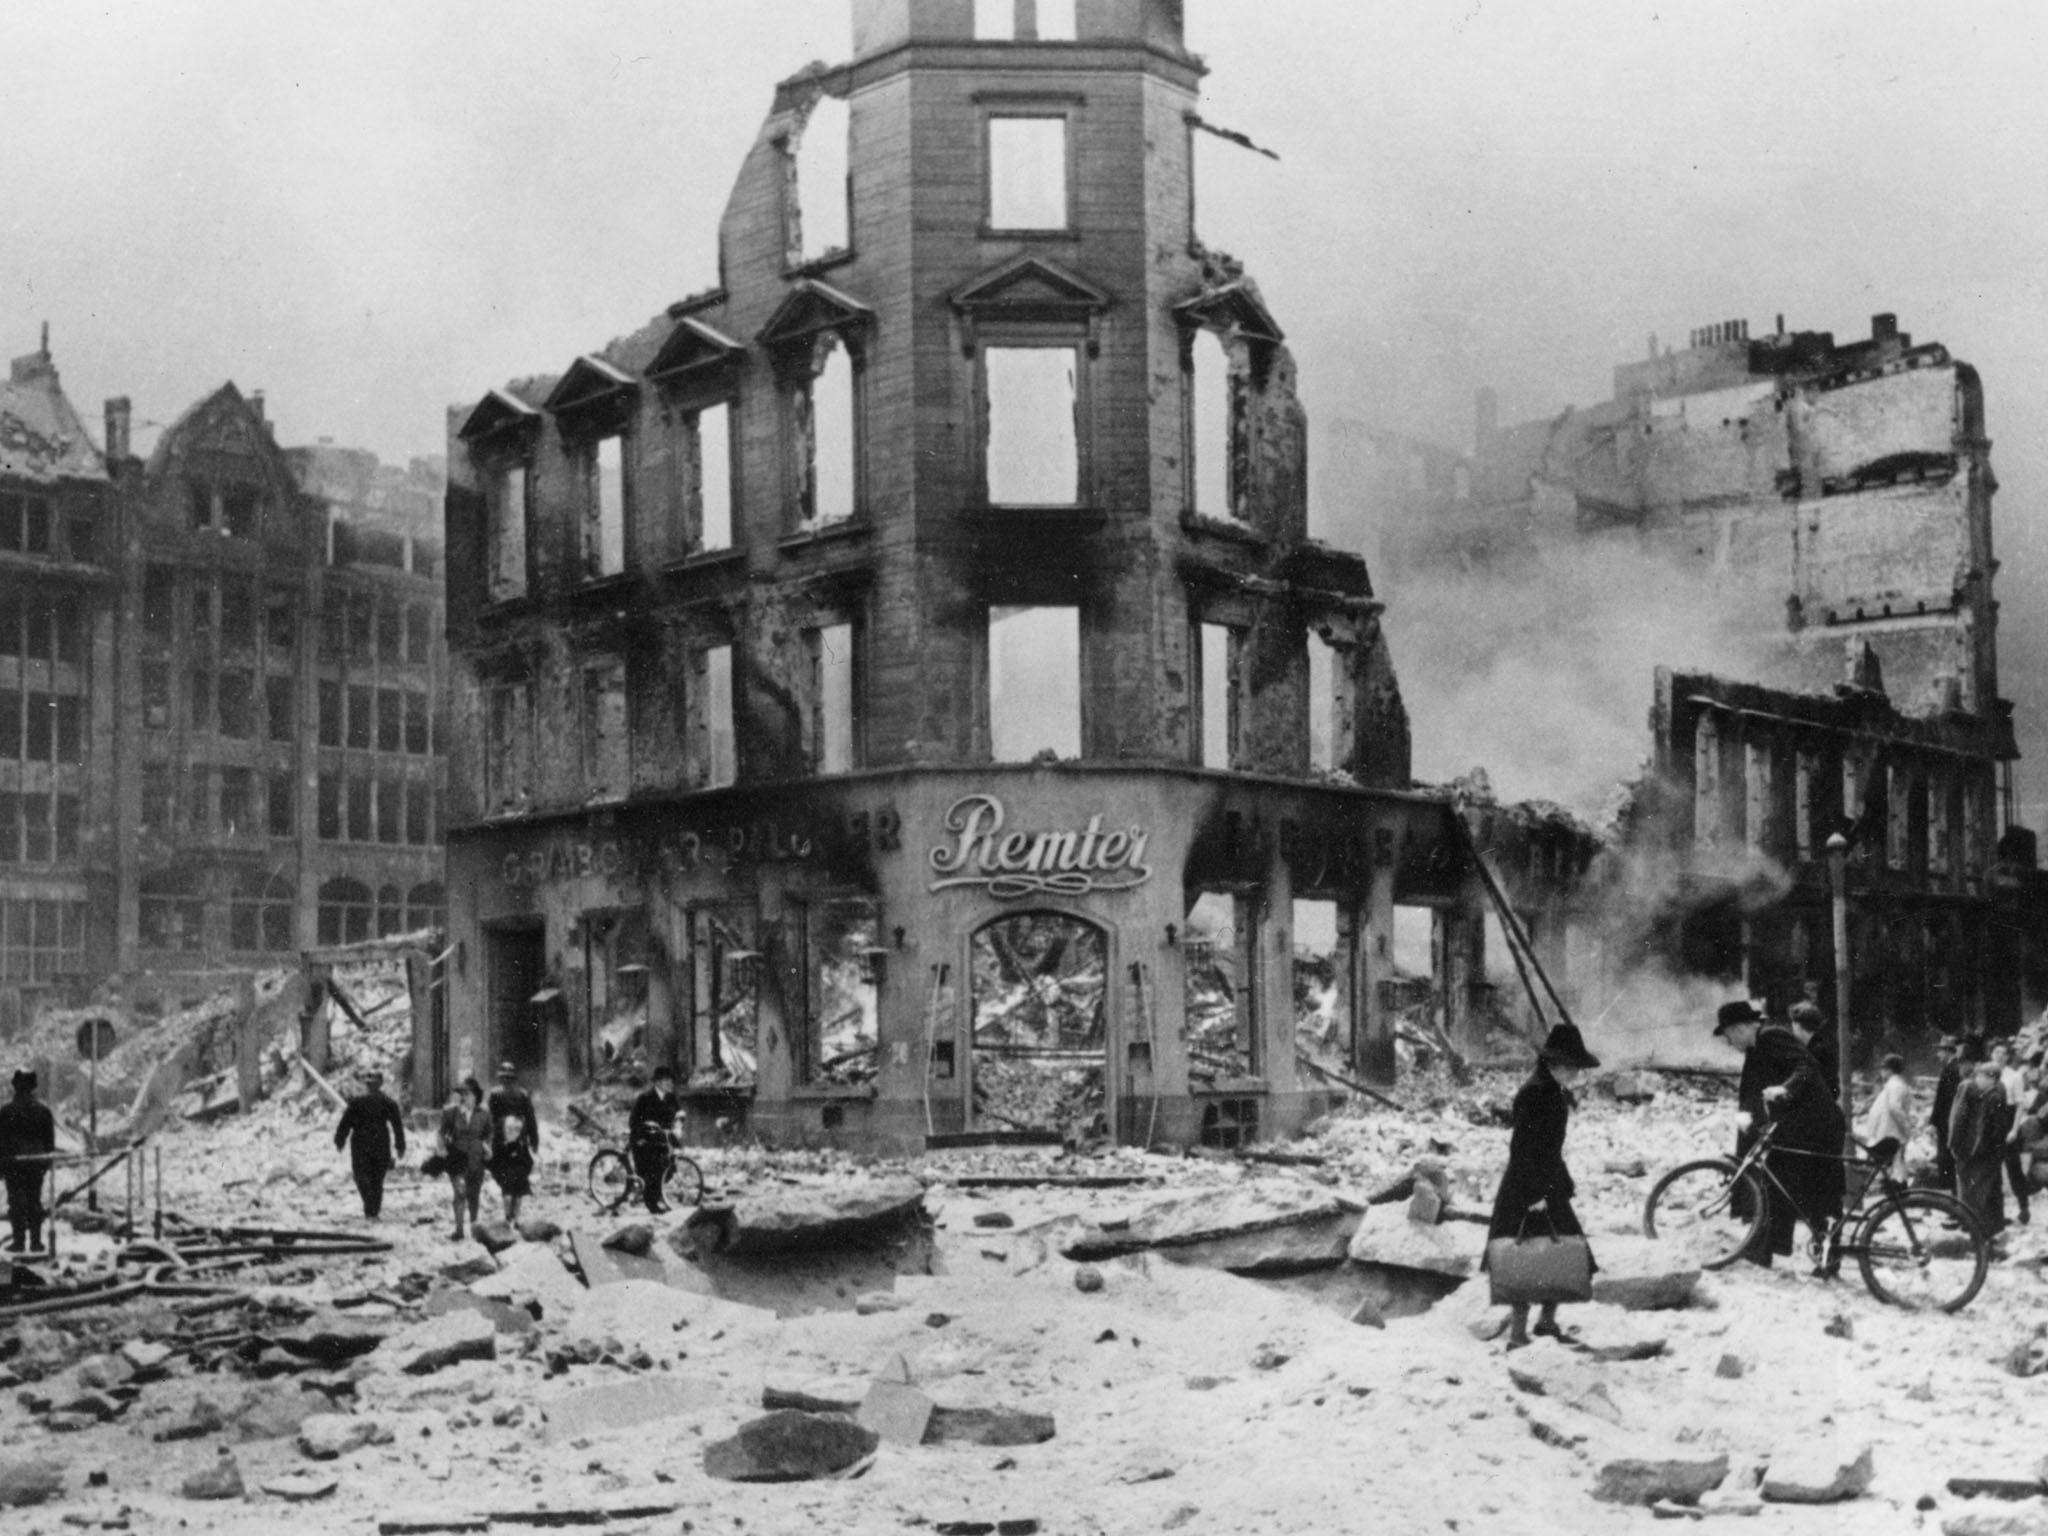 Never again: the ruins of Hamburg after allied bombing in 1943